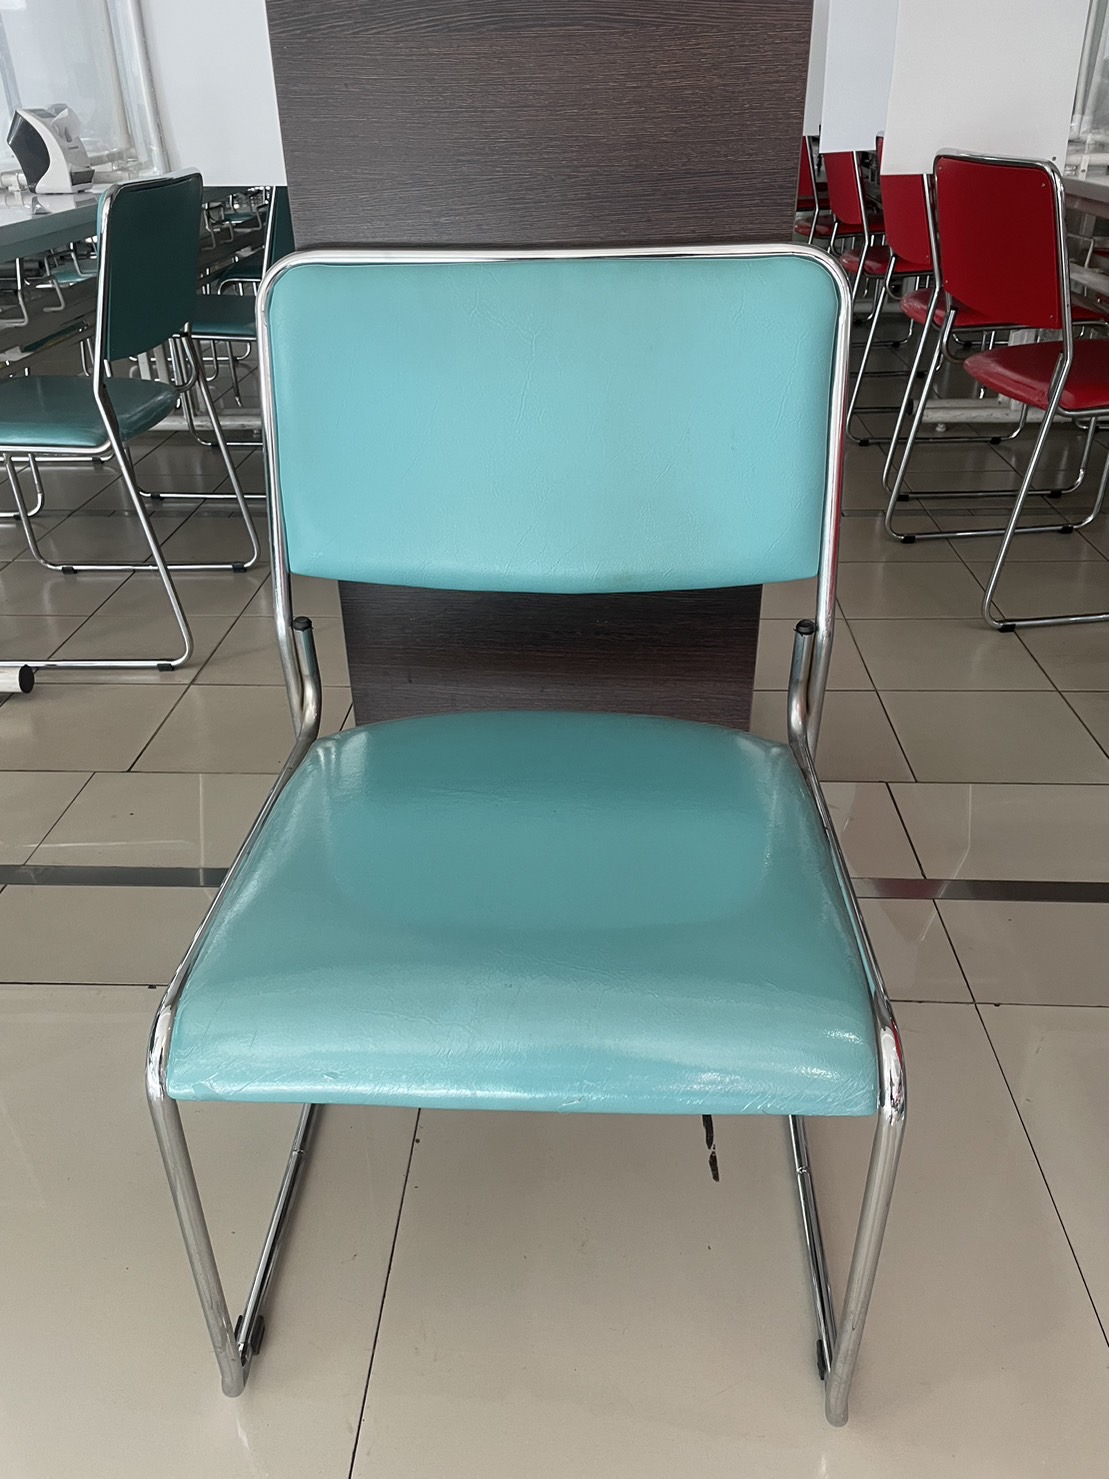 96086::VC-830::A VC modern chair with PVC leather/mesh fabric seat and chrome base. Dimension (WxDxH) cm : 46x53x78 